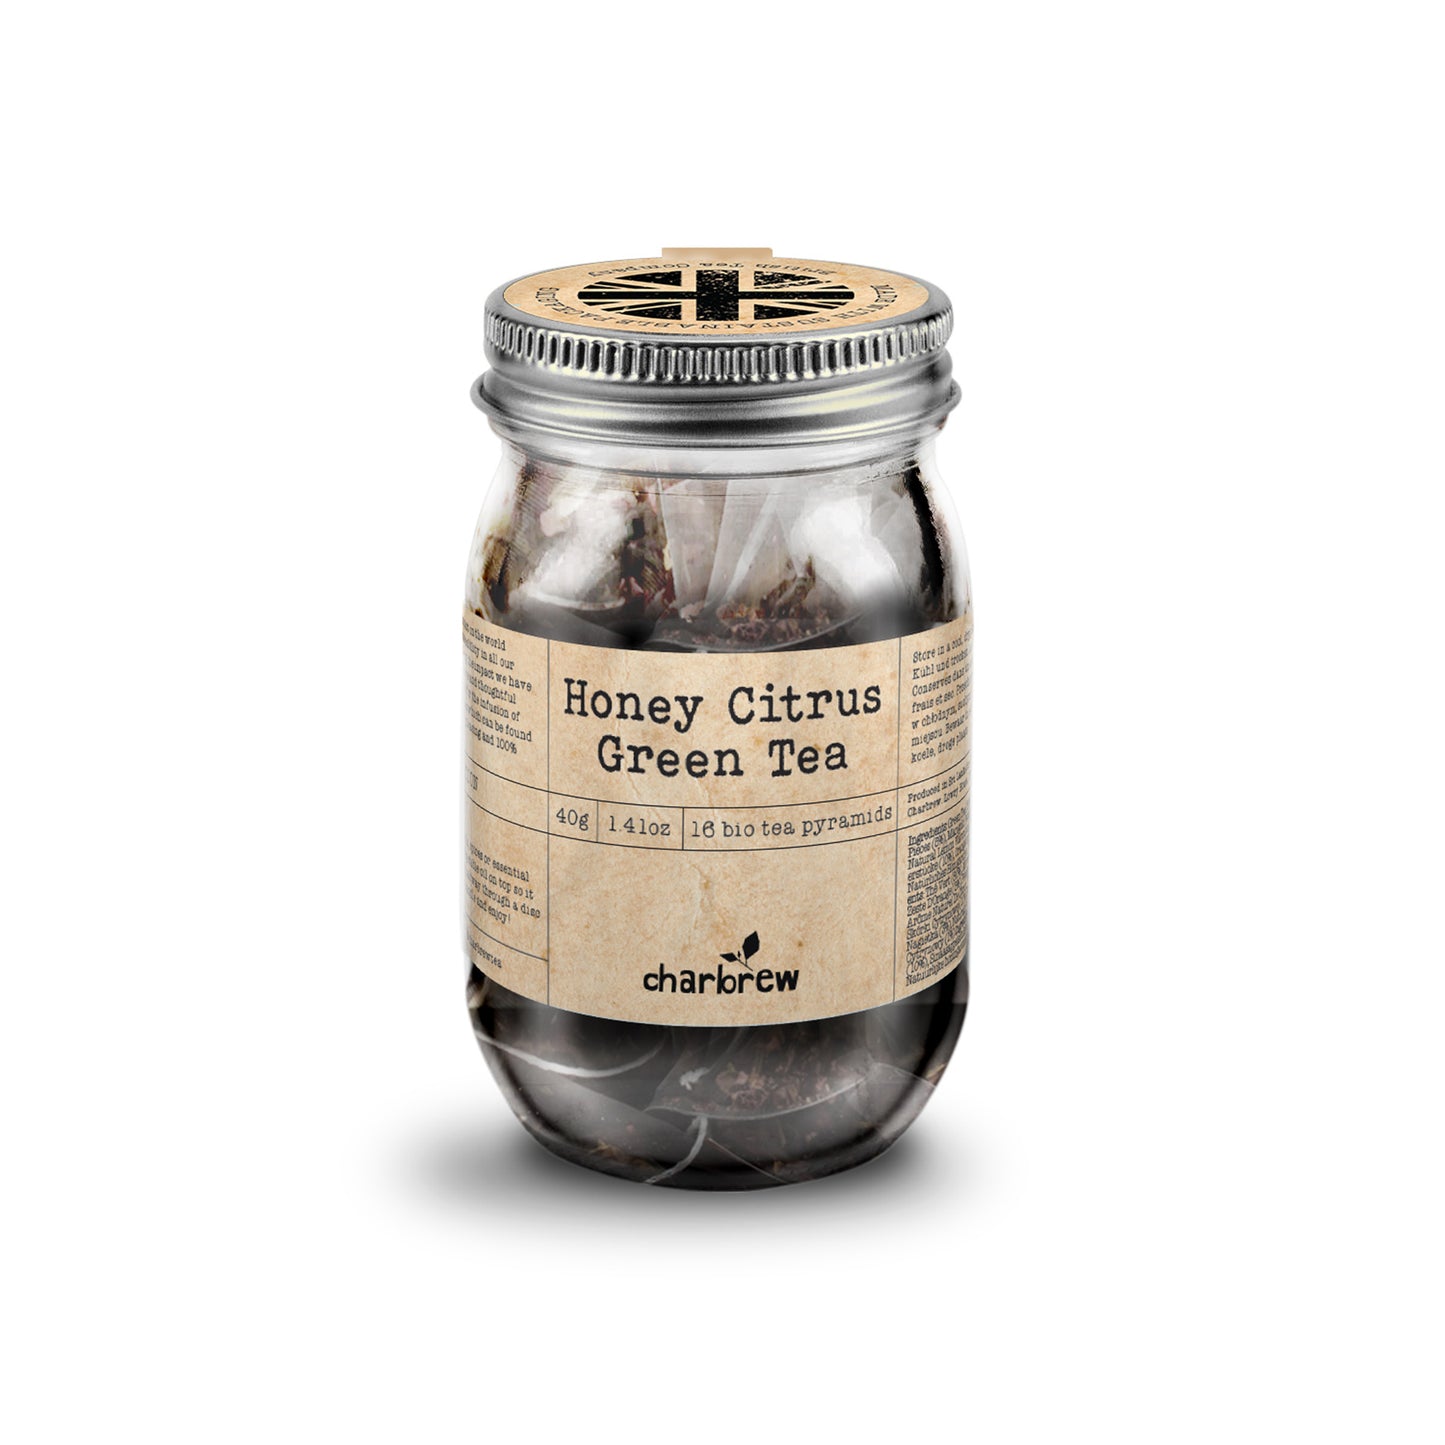 Charbrew carefully crafted honey citrus green tea in re-usable mason jar